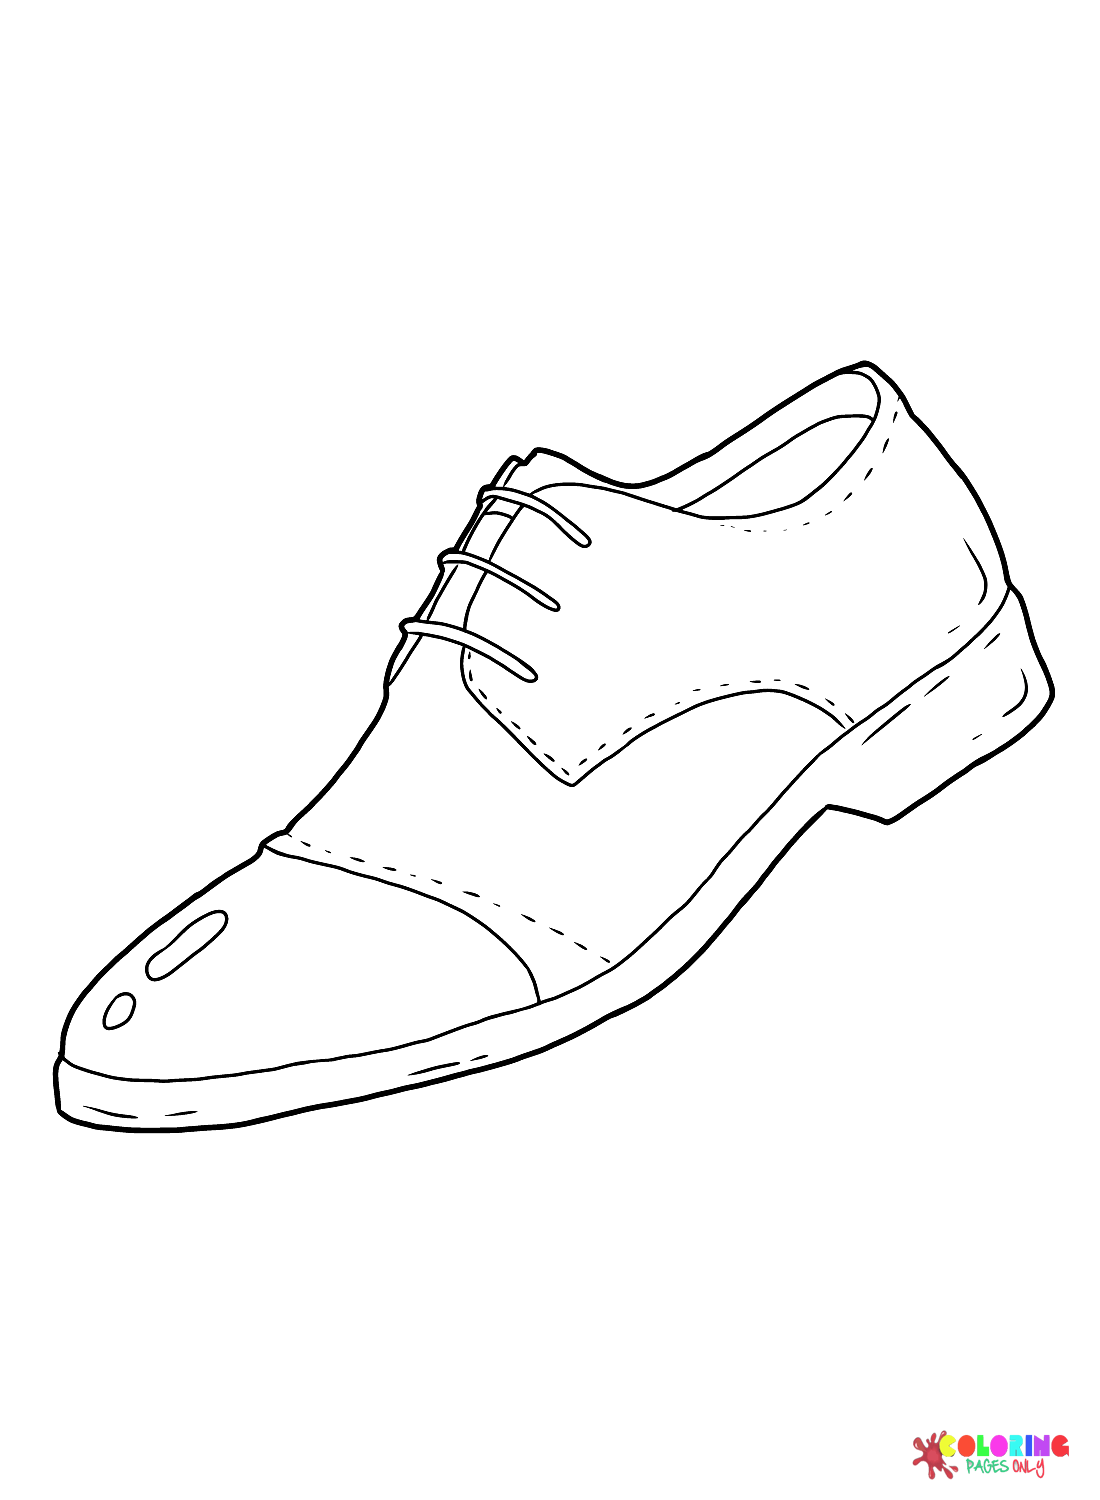 Wedding Shoes for Men Coloring Page - Free Printable Coloring Pages